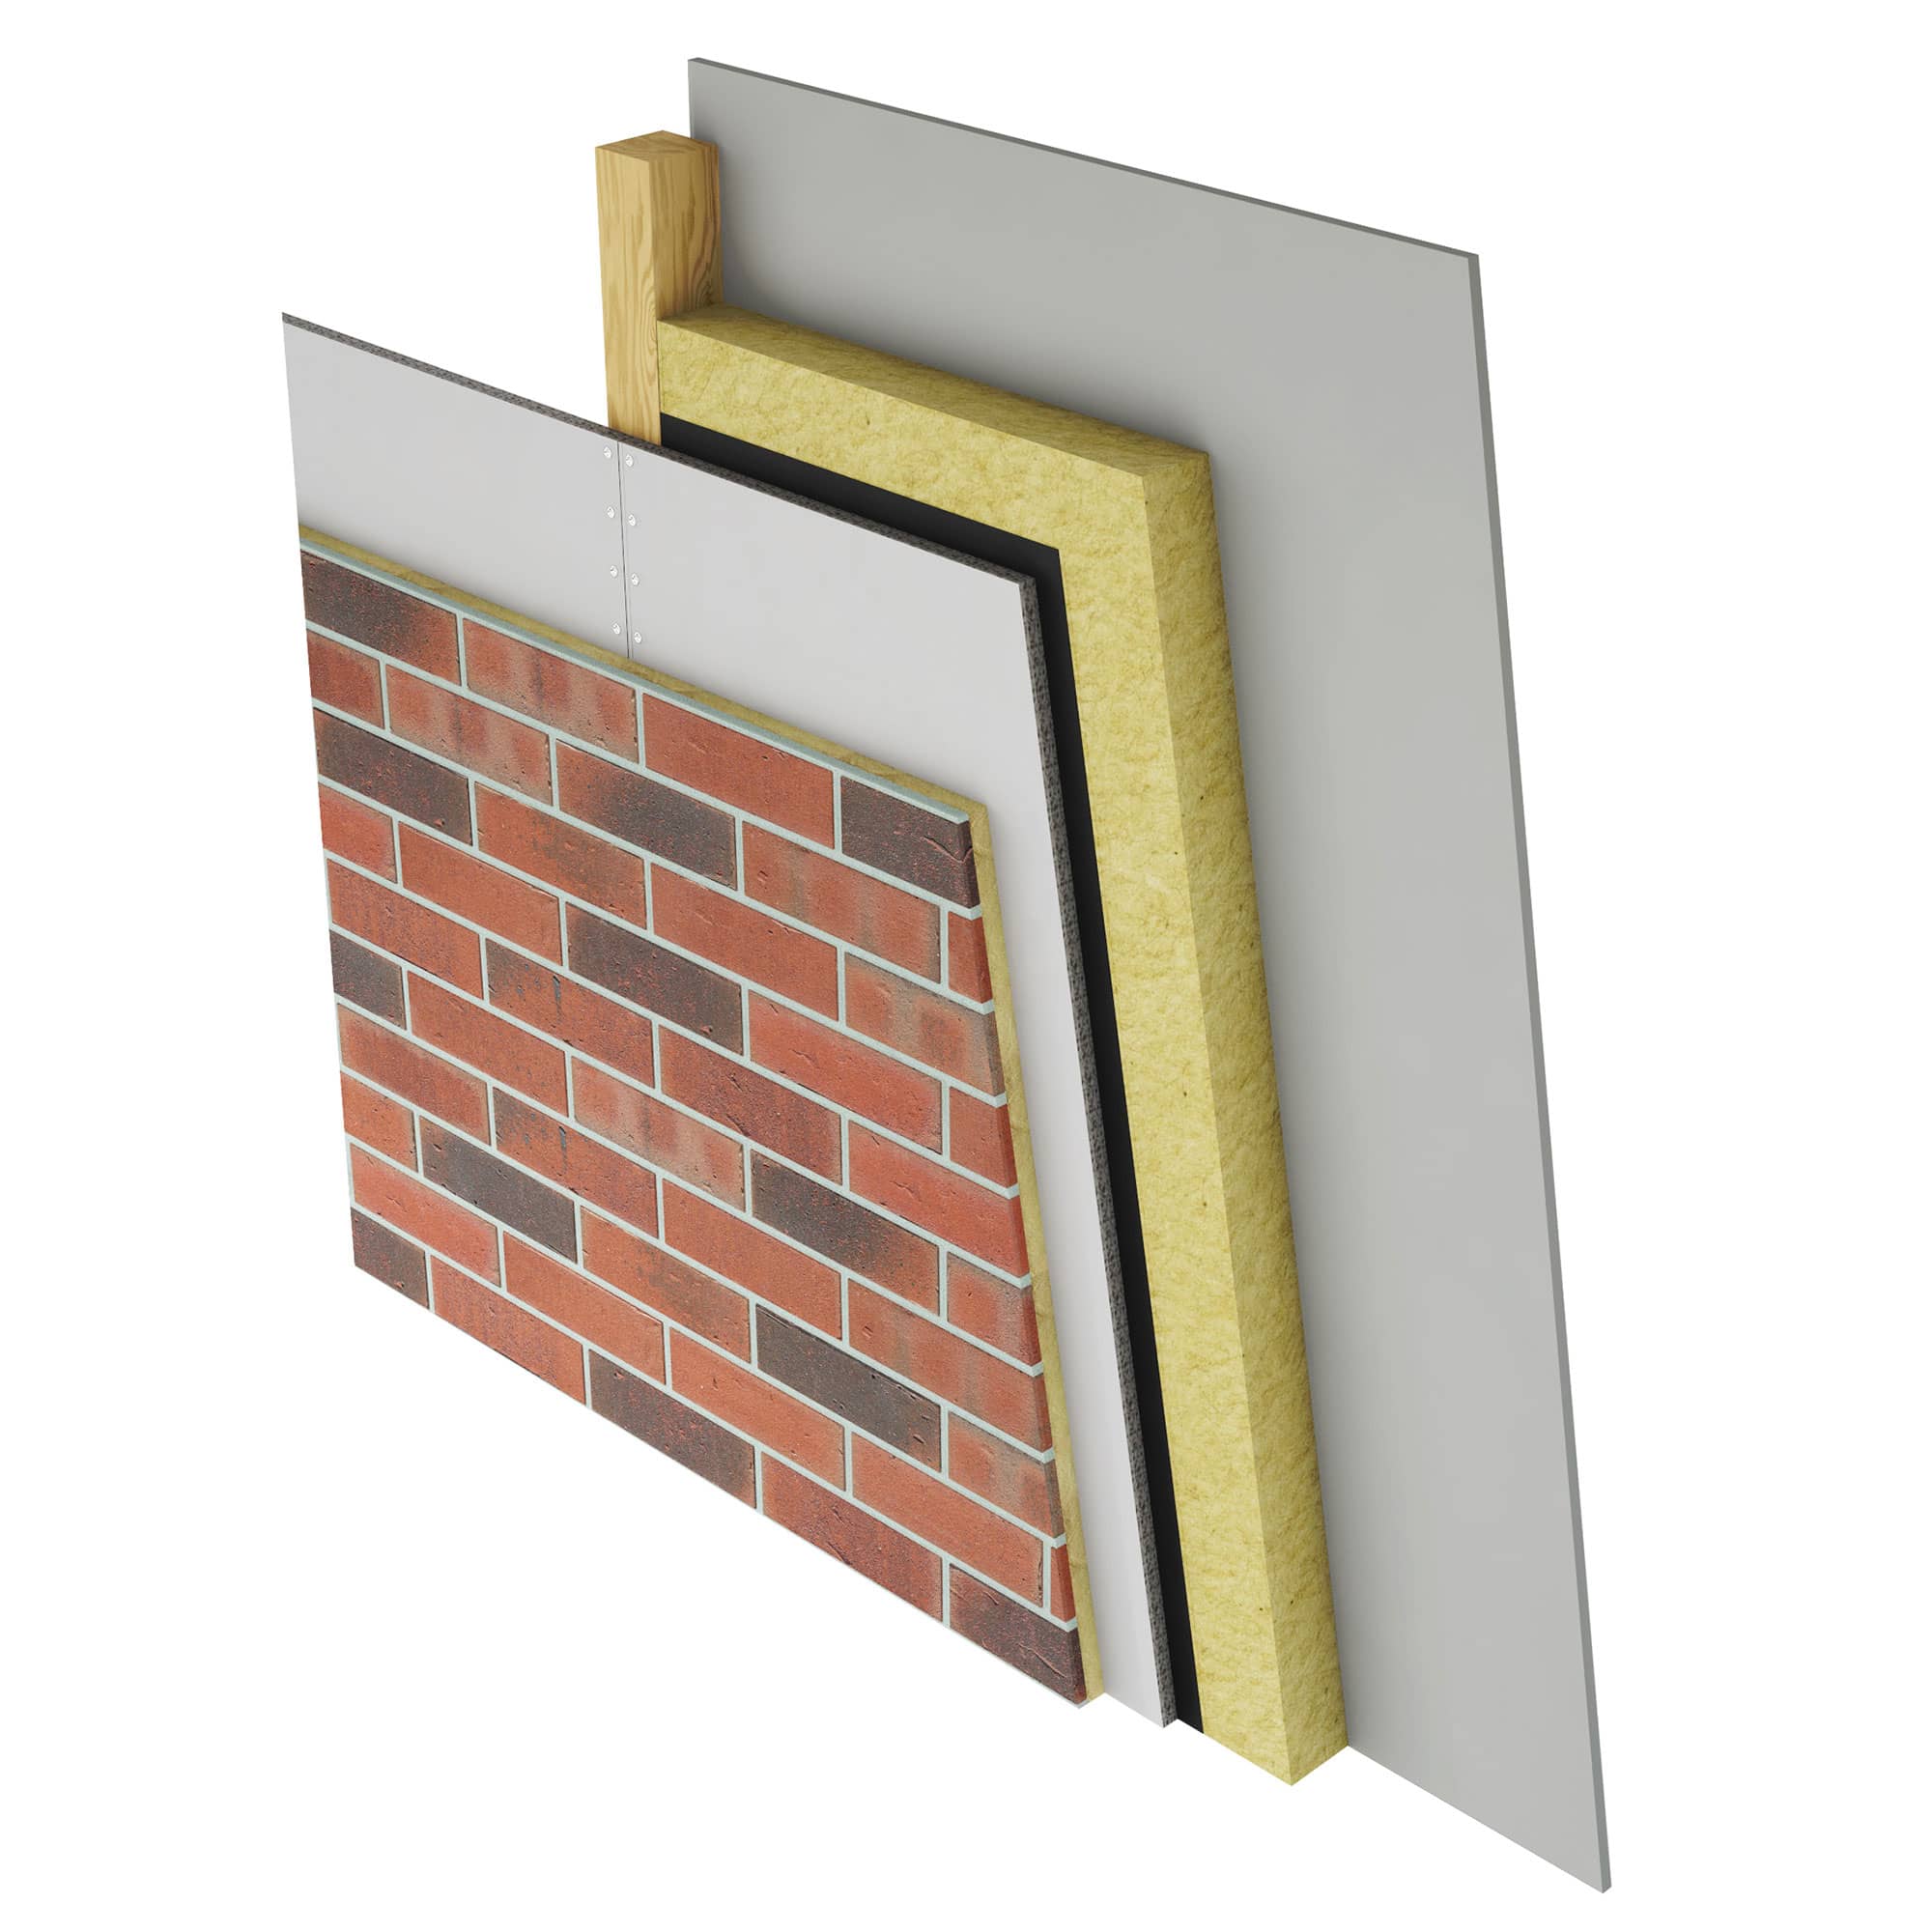 Wooden stud frame with cement board